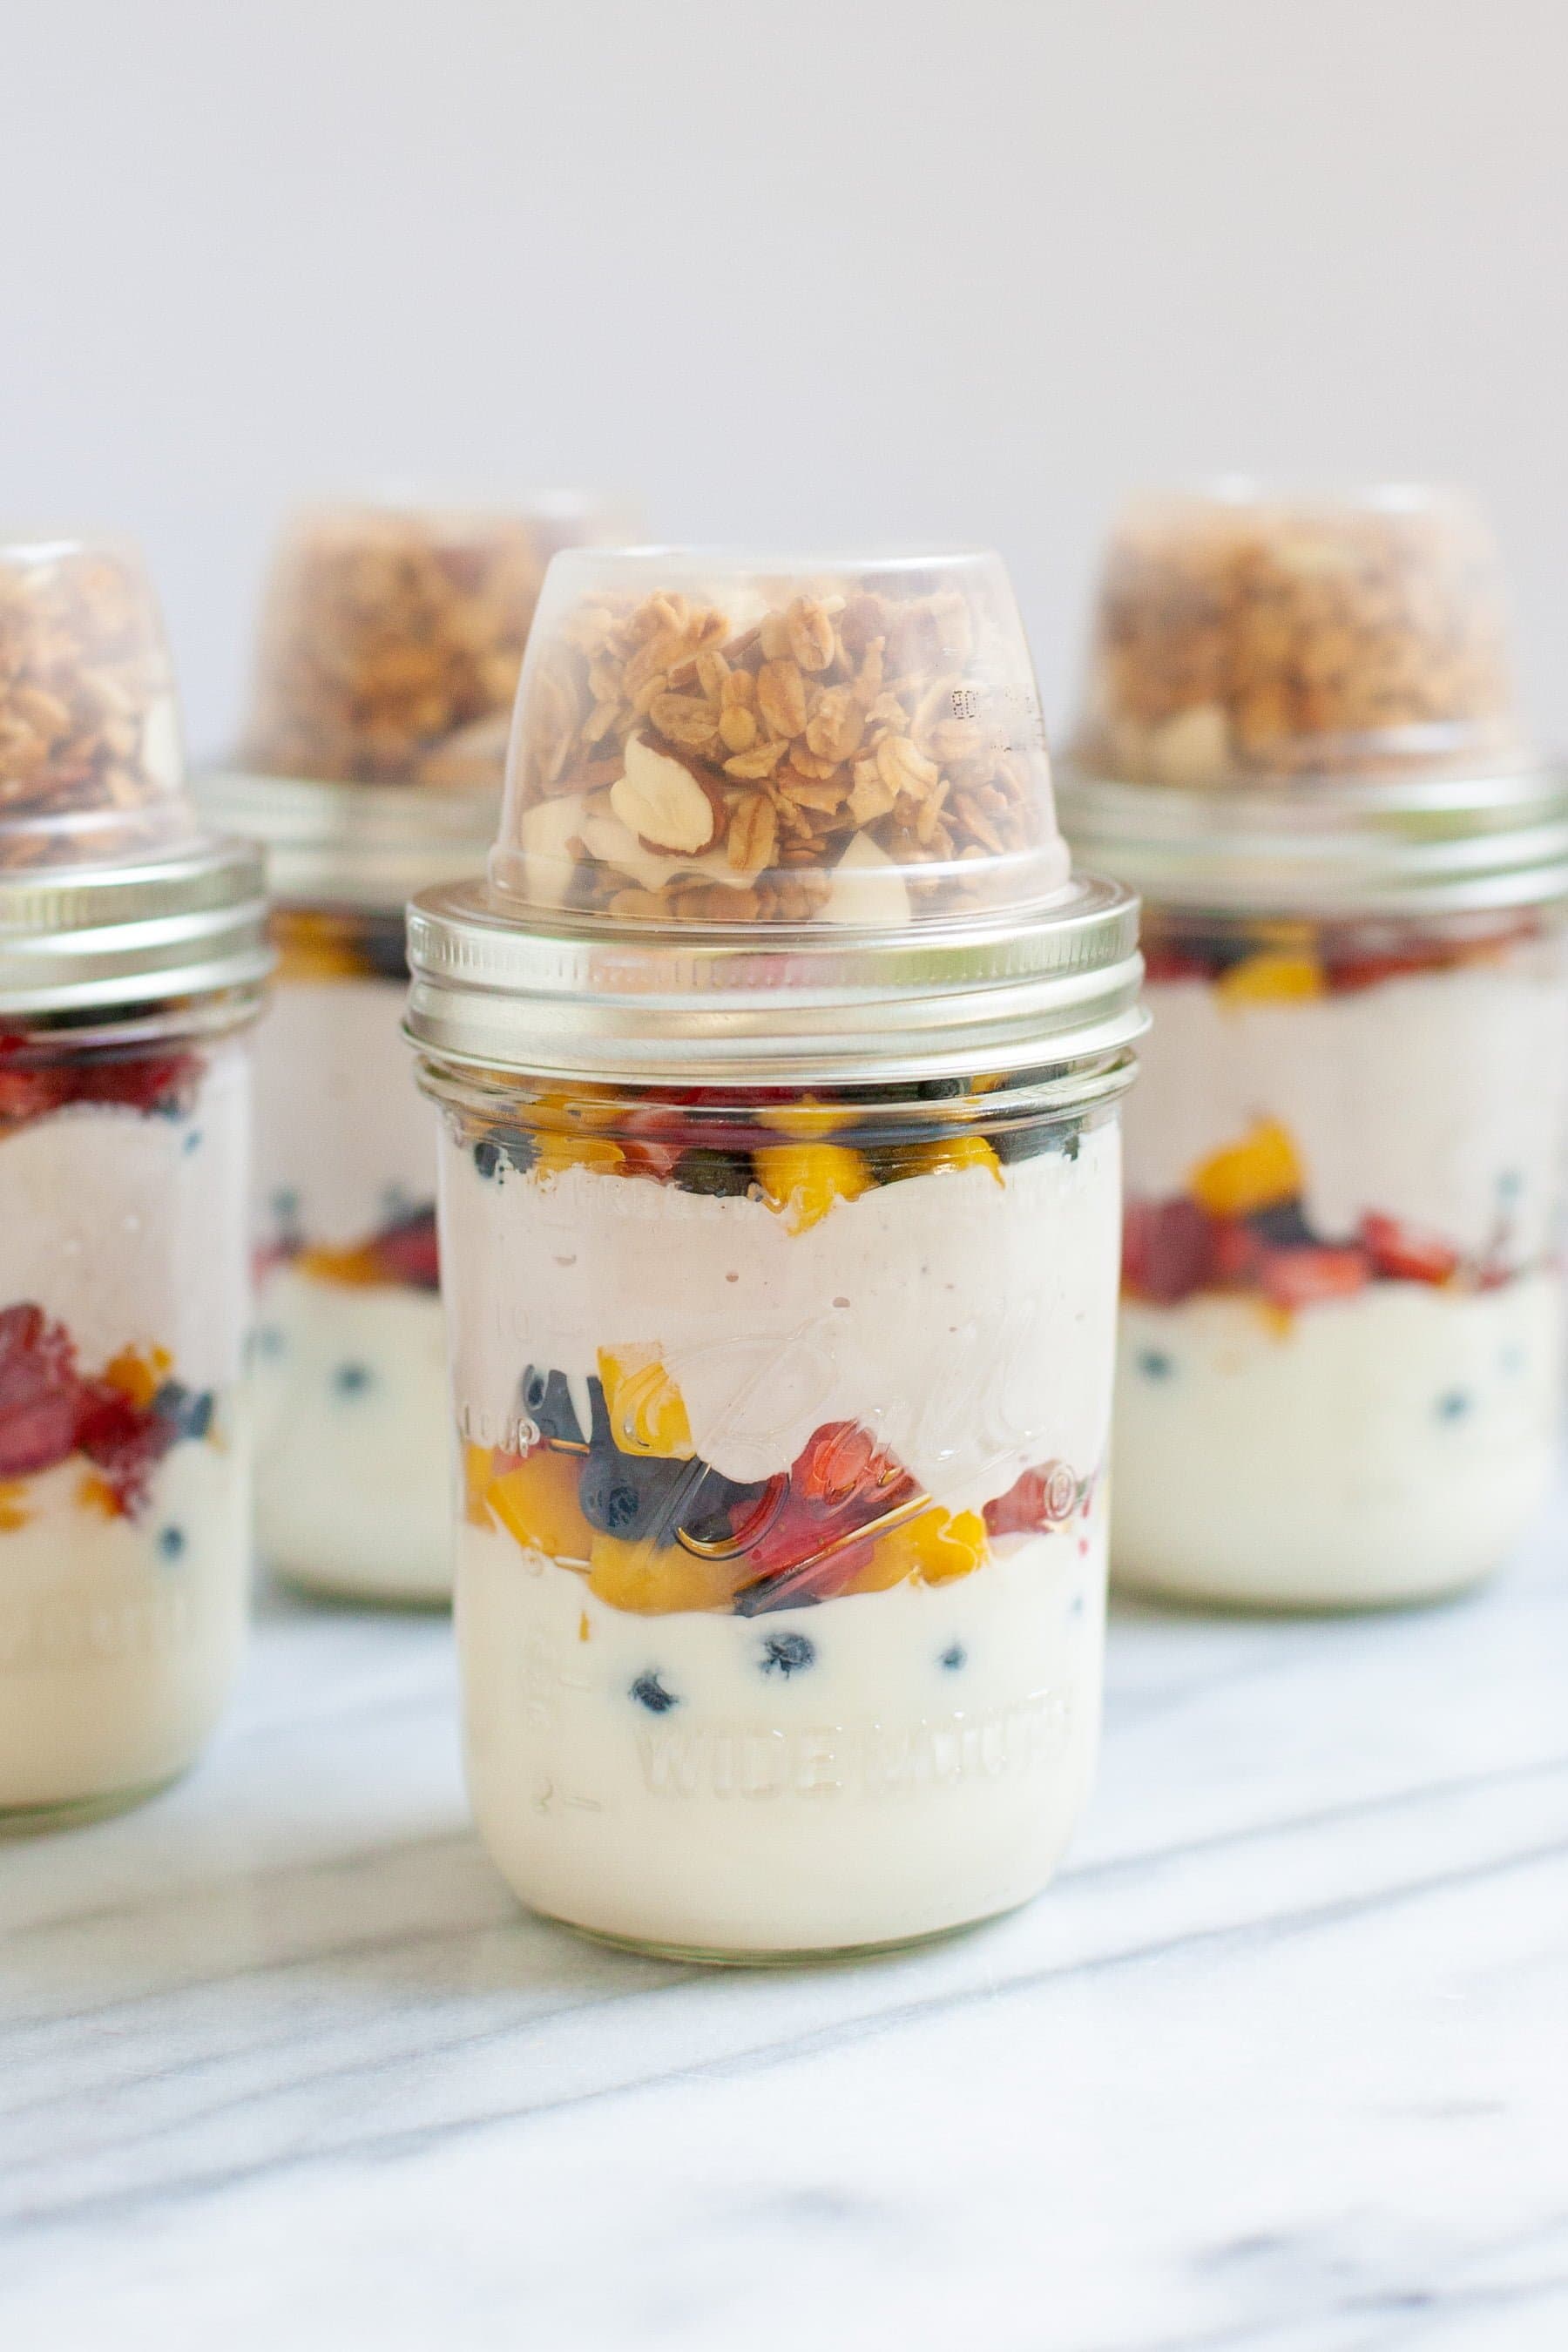 Meal Prep Fruit and Yogurt Parfaits in glass jars, with the granola in a separate cup on top